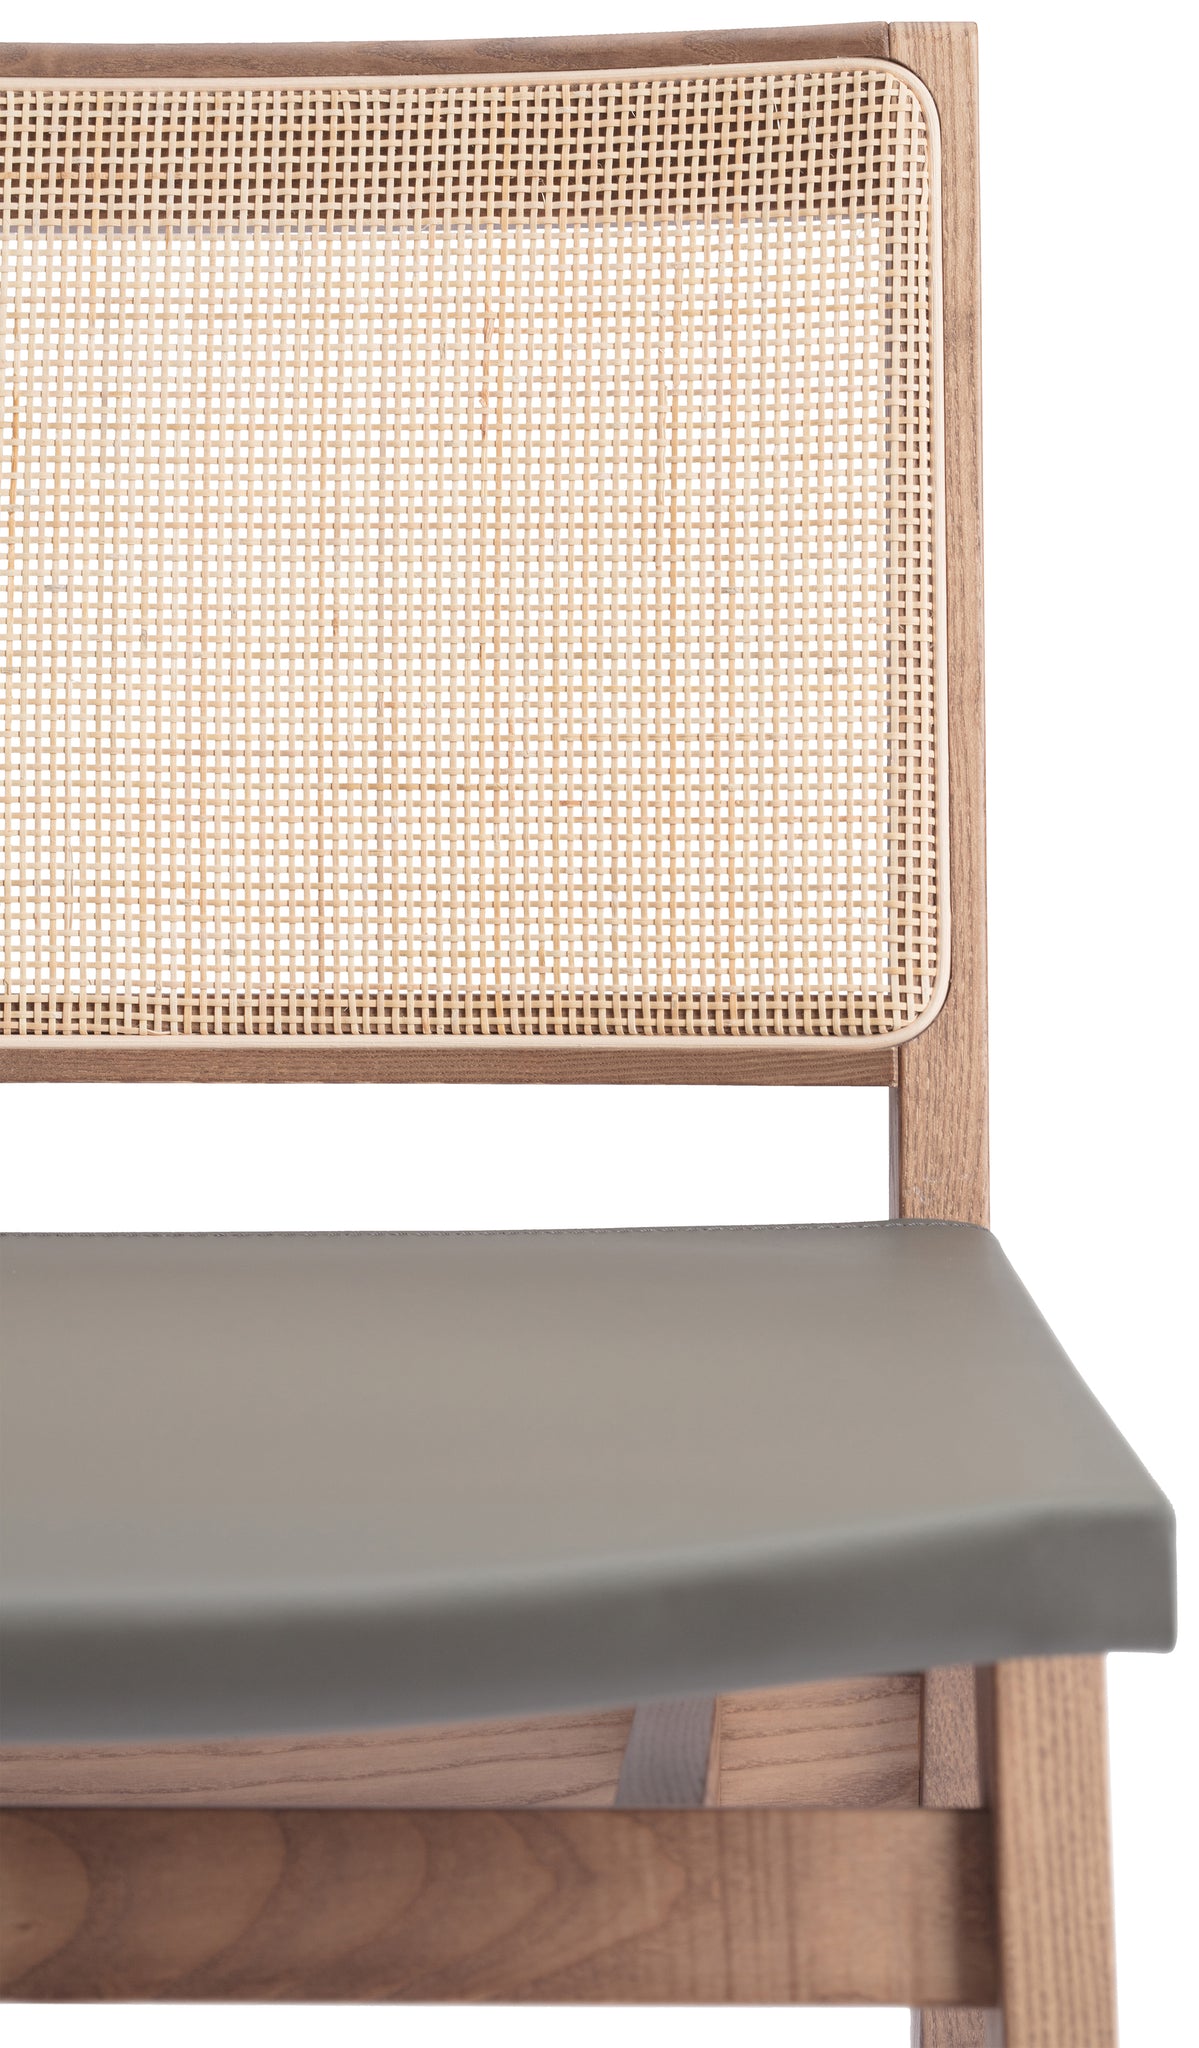 Close-up 1 of an Elye modern dining side chair, walnut stained ash frame, square weave cane back, contract grade gray leather seat, produced by Klarel in Italy. #K41-2